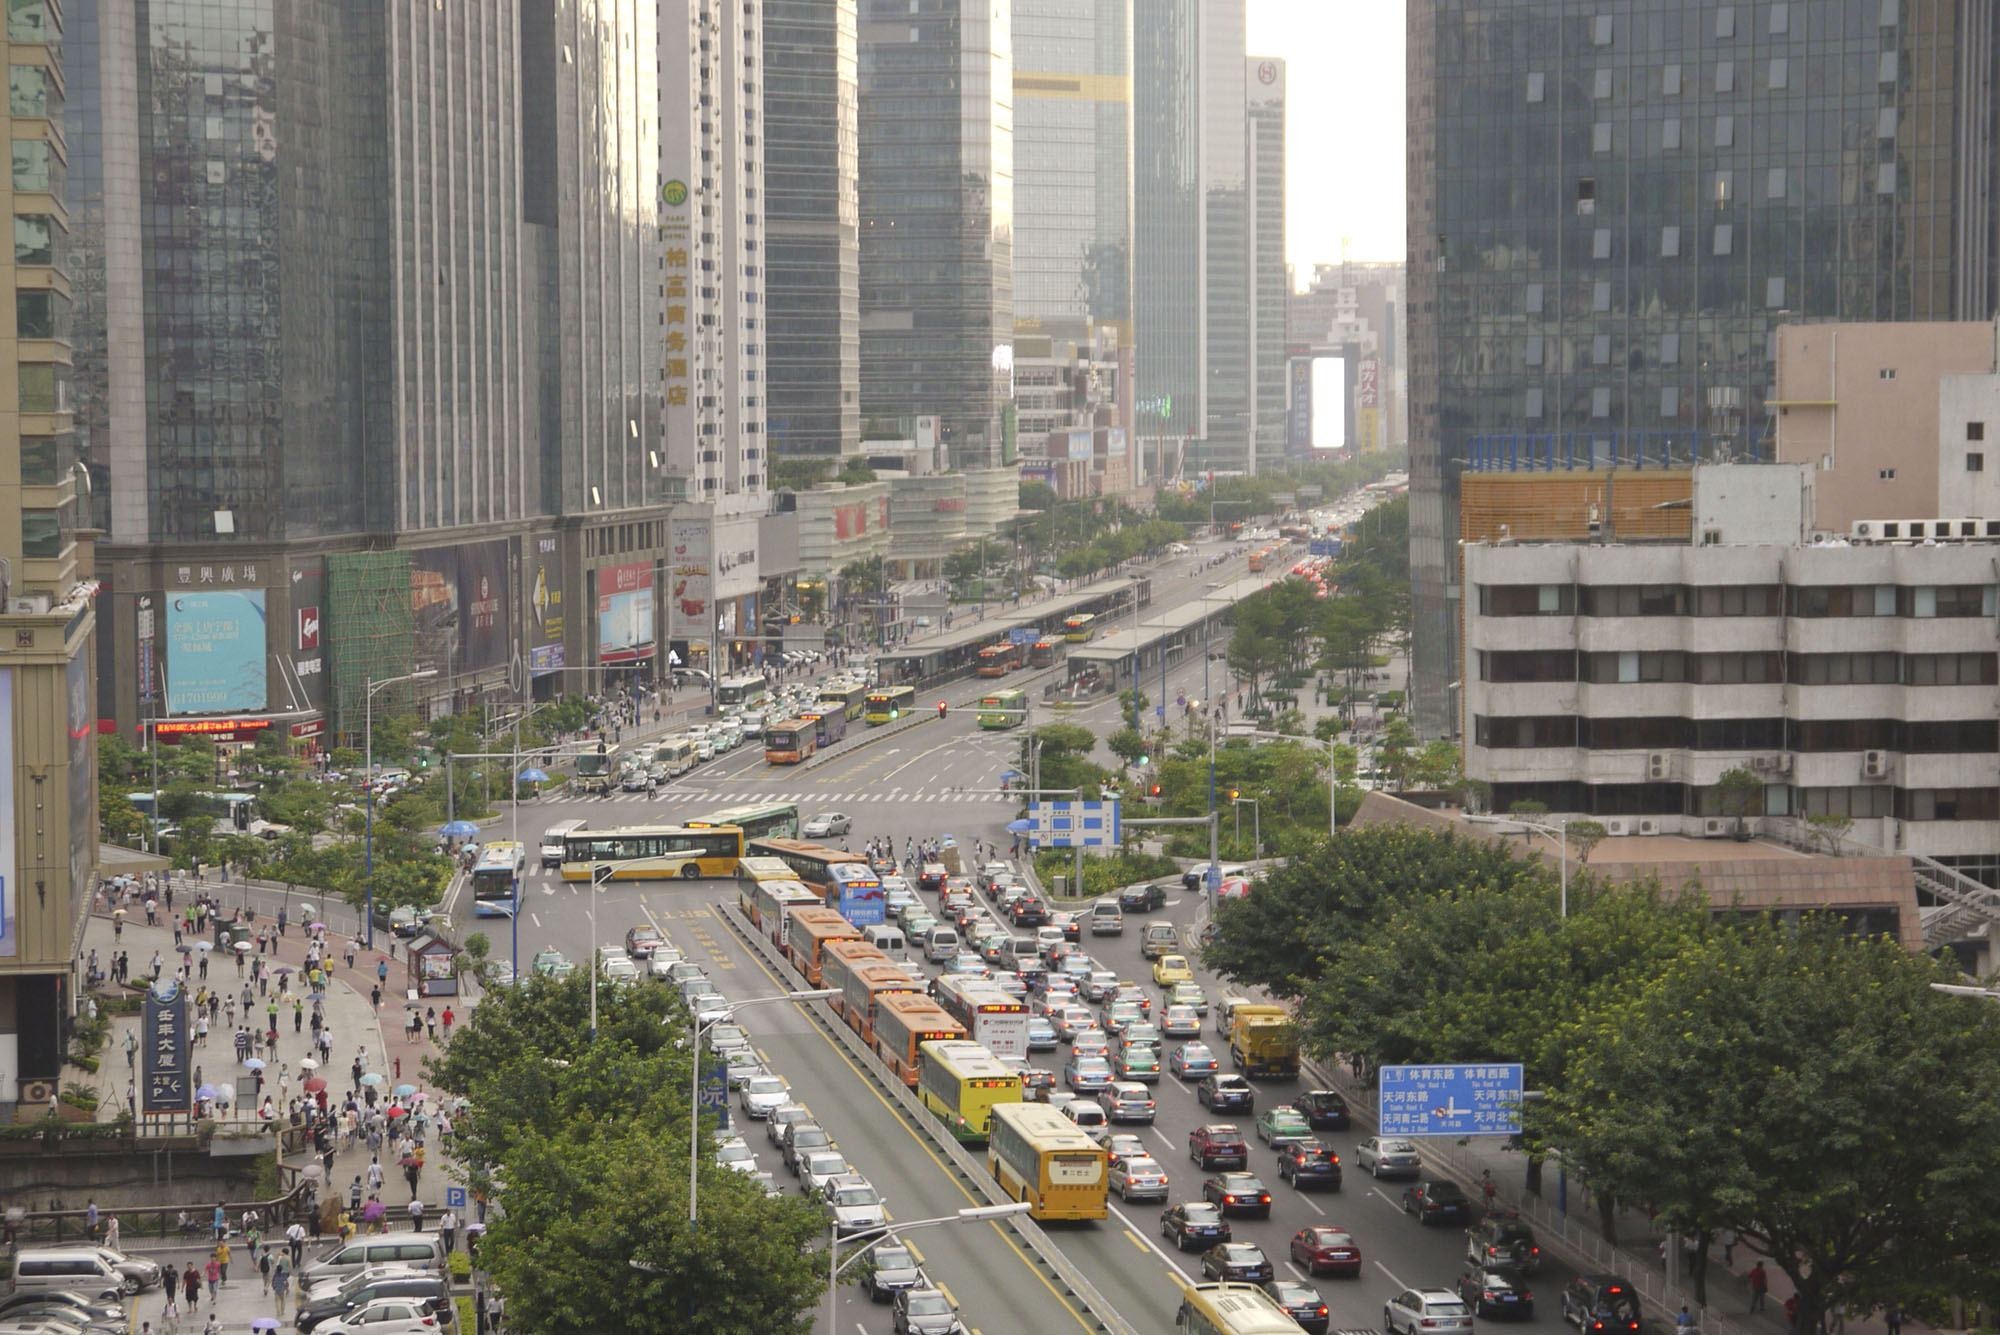 Fig. 22.1 Guangzhou, China, is a median-aligned busway configuration with split stations located along the outside of the busway.